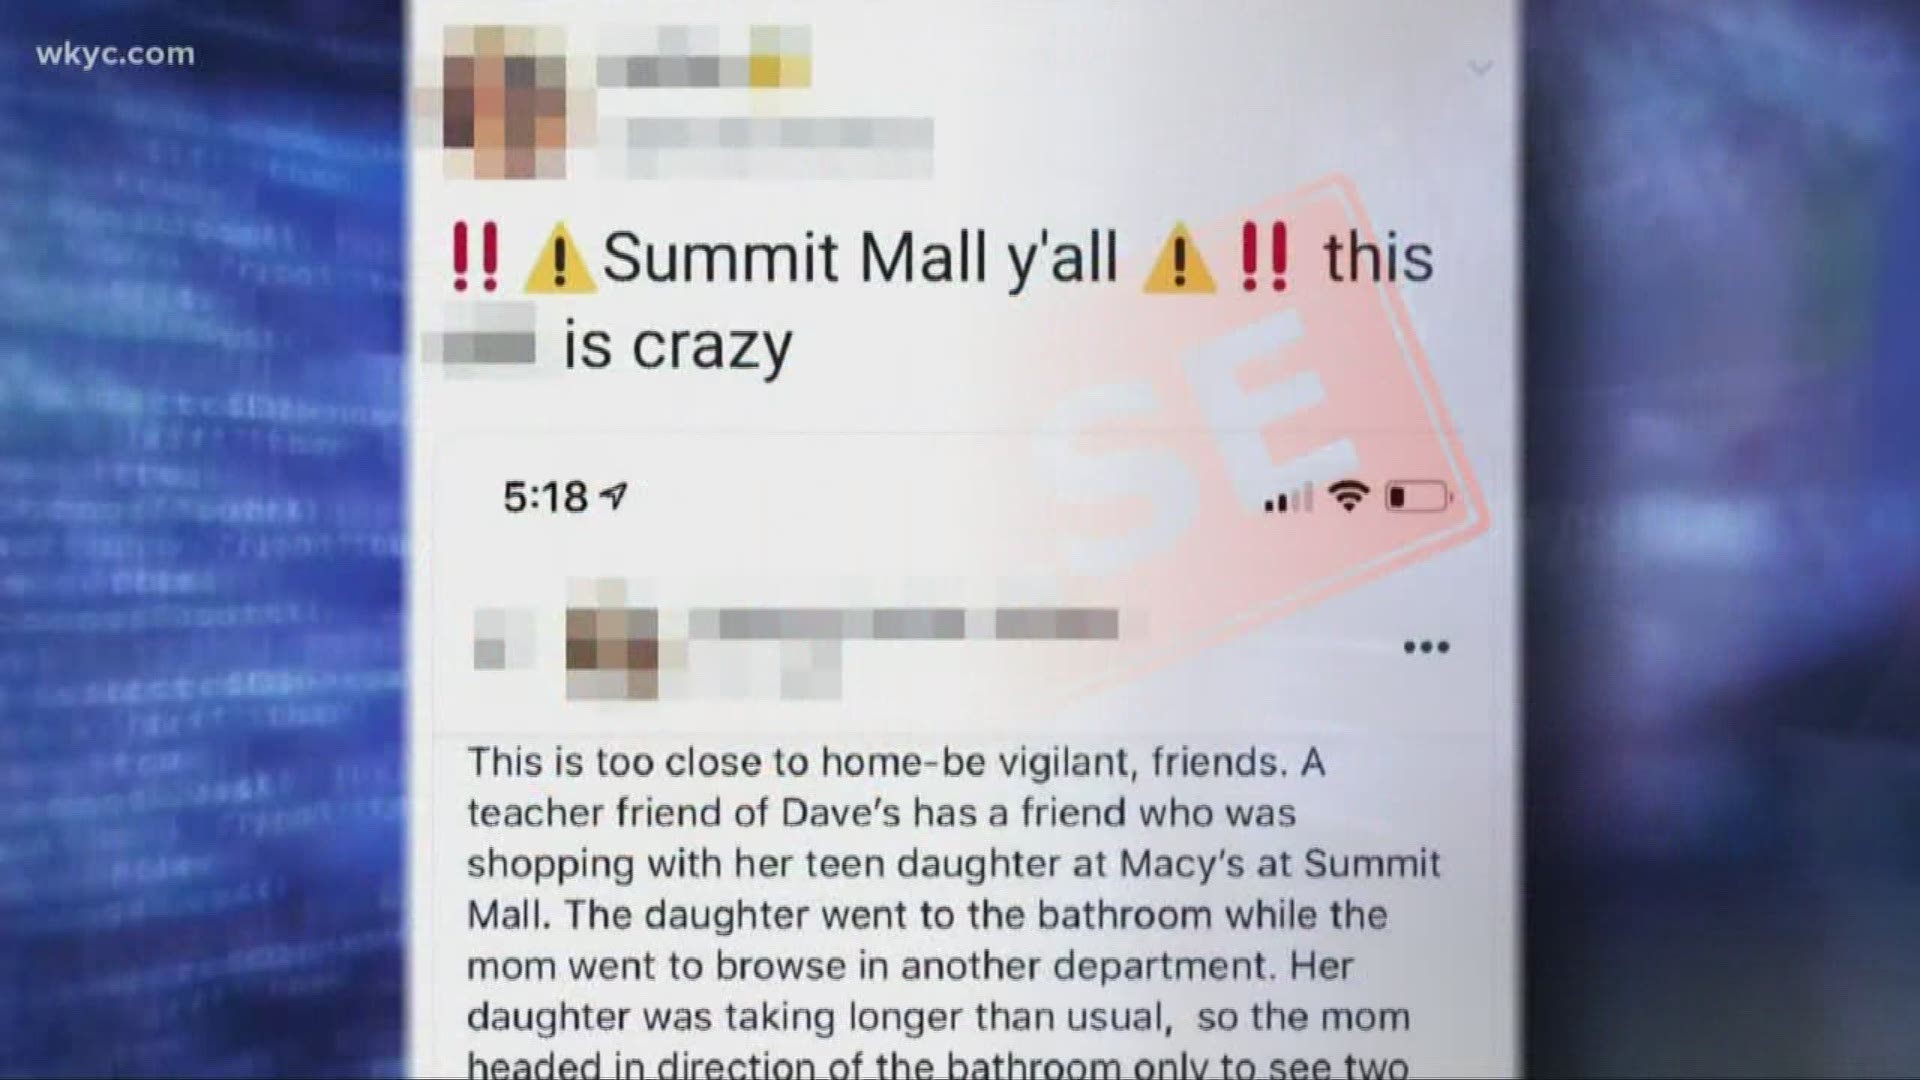 The social media post "told the story of a young woman being drugged and then being physically drug through the mall." It created panic in the community.